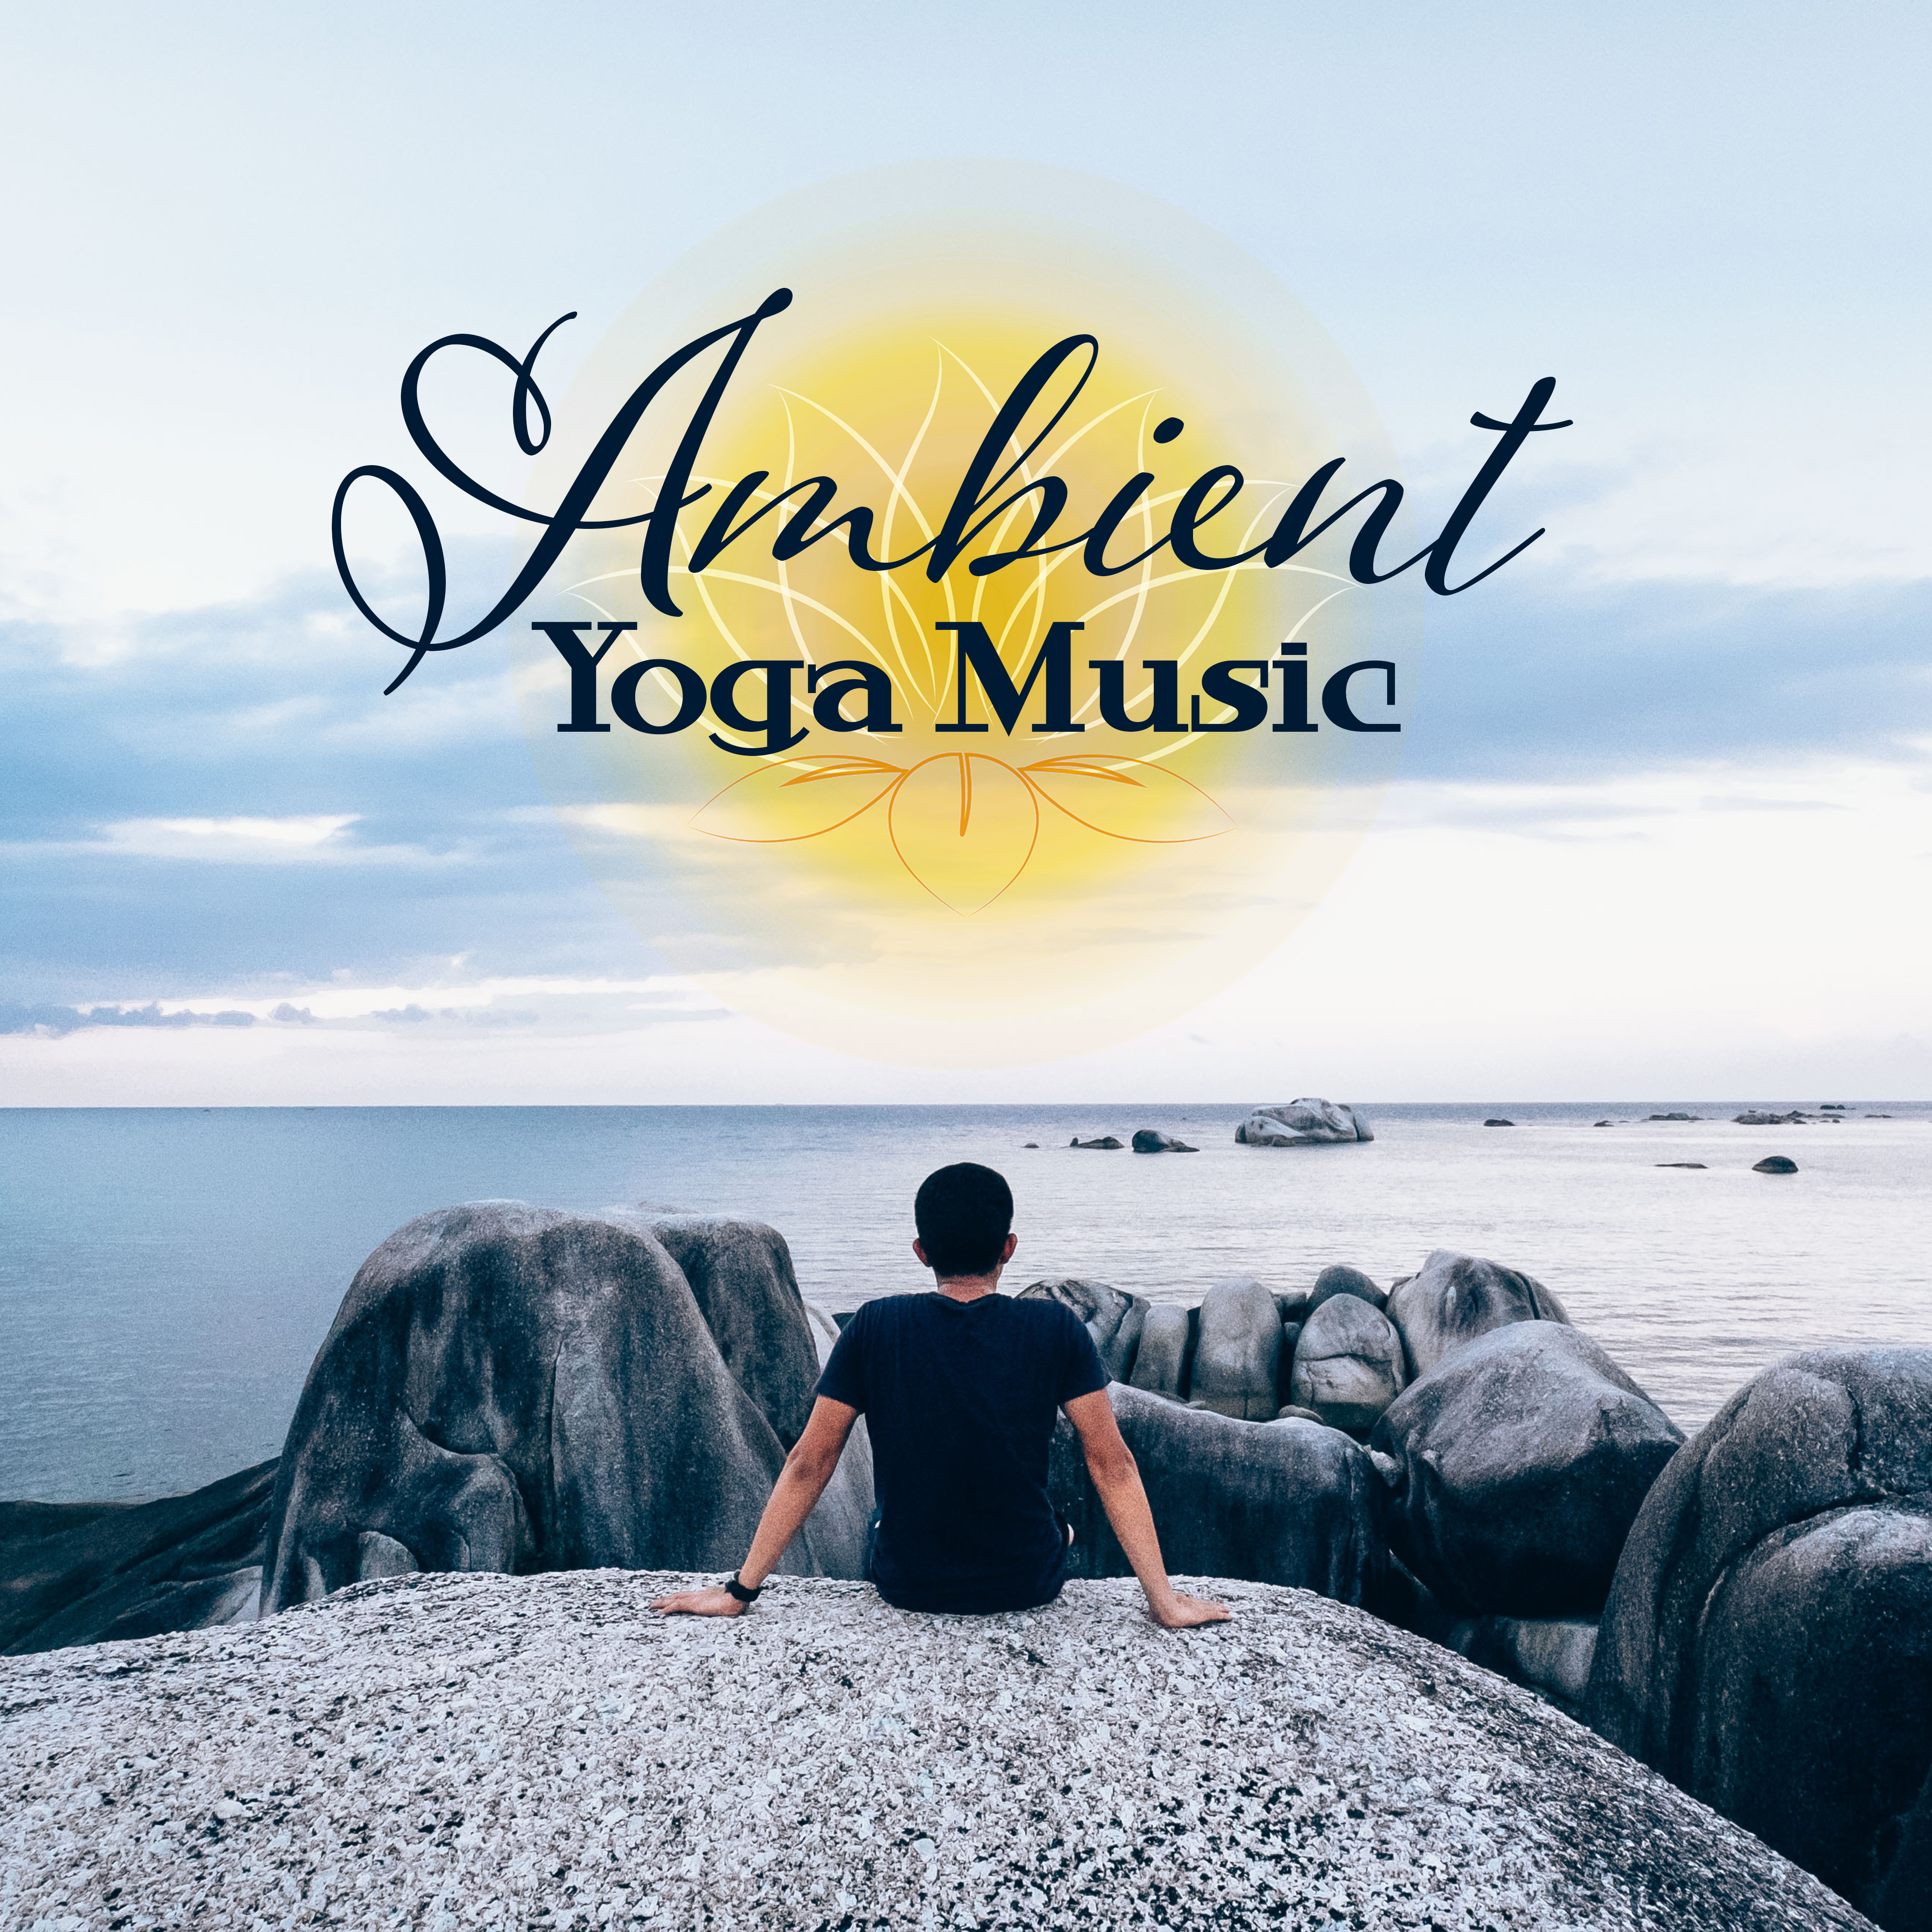 Ambient Yoga Music  New Age Songs for Meditation, Yoga Practice, Workout, Zen, Healing Bliss